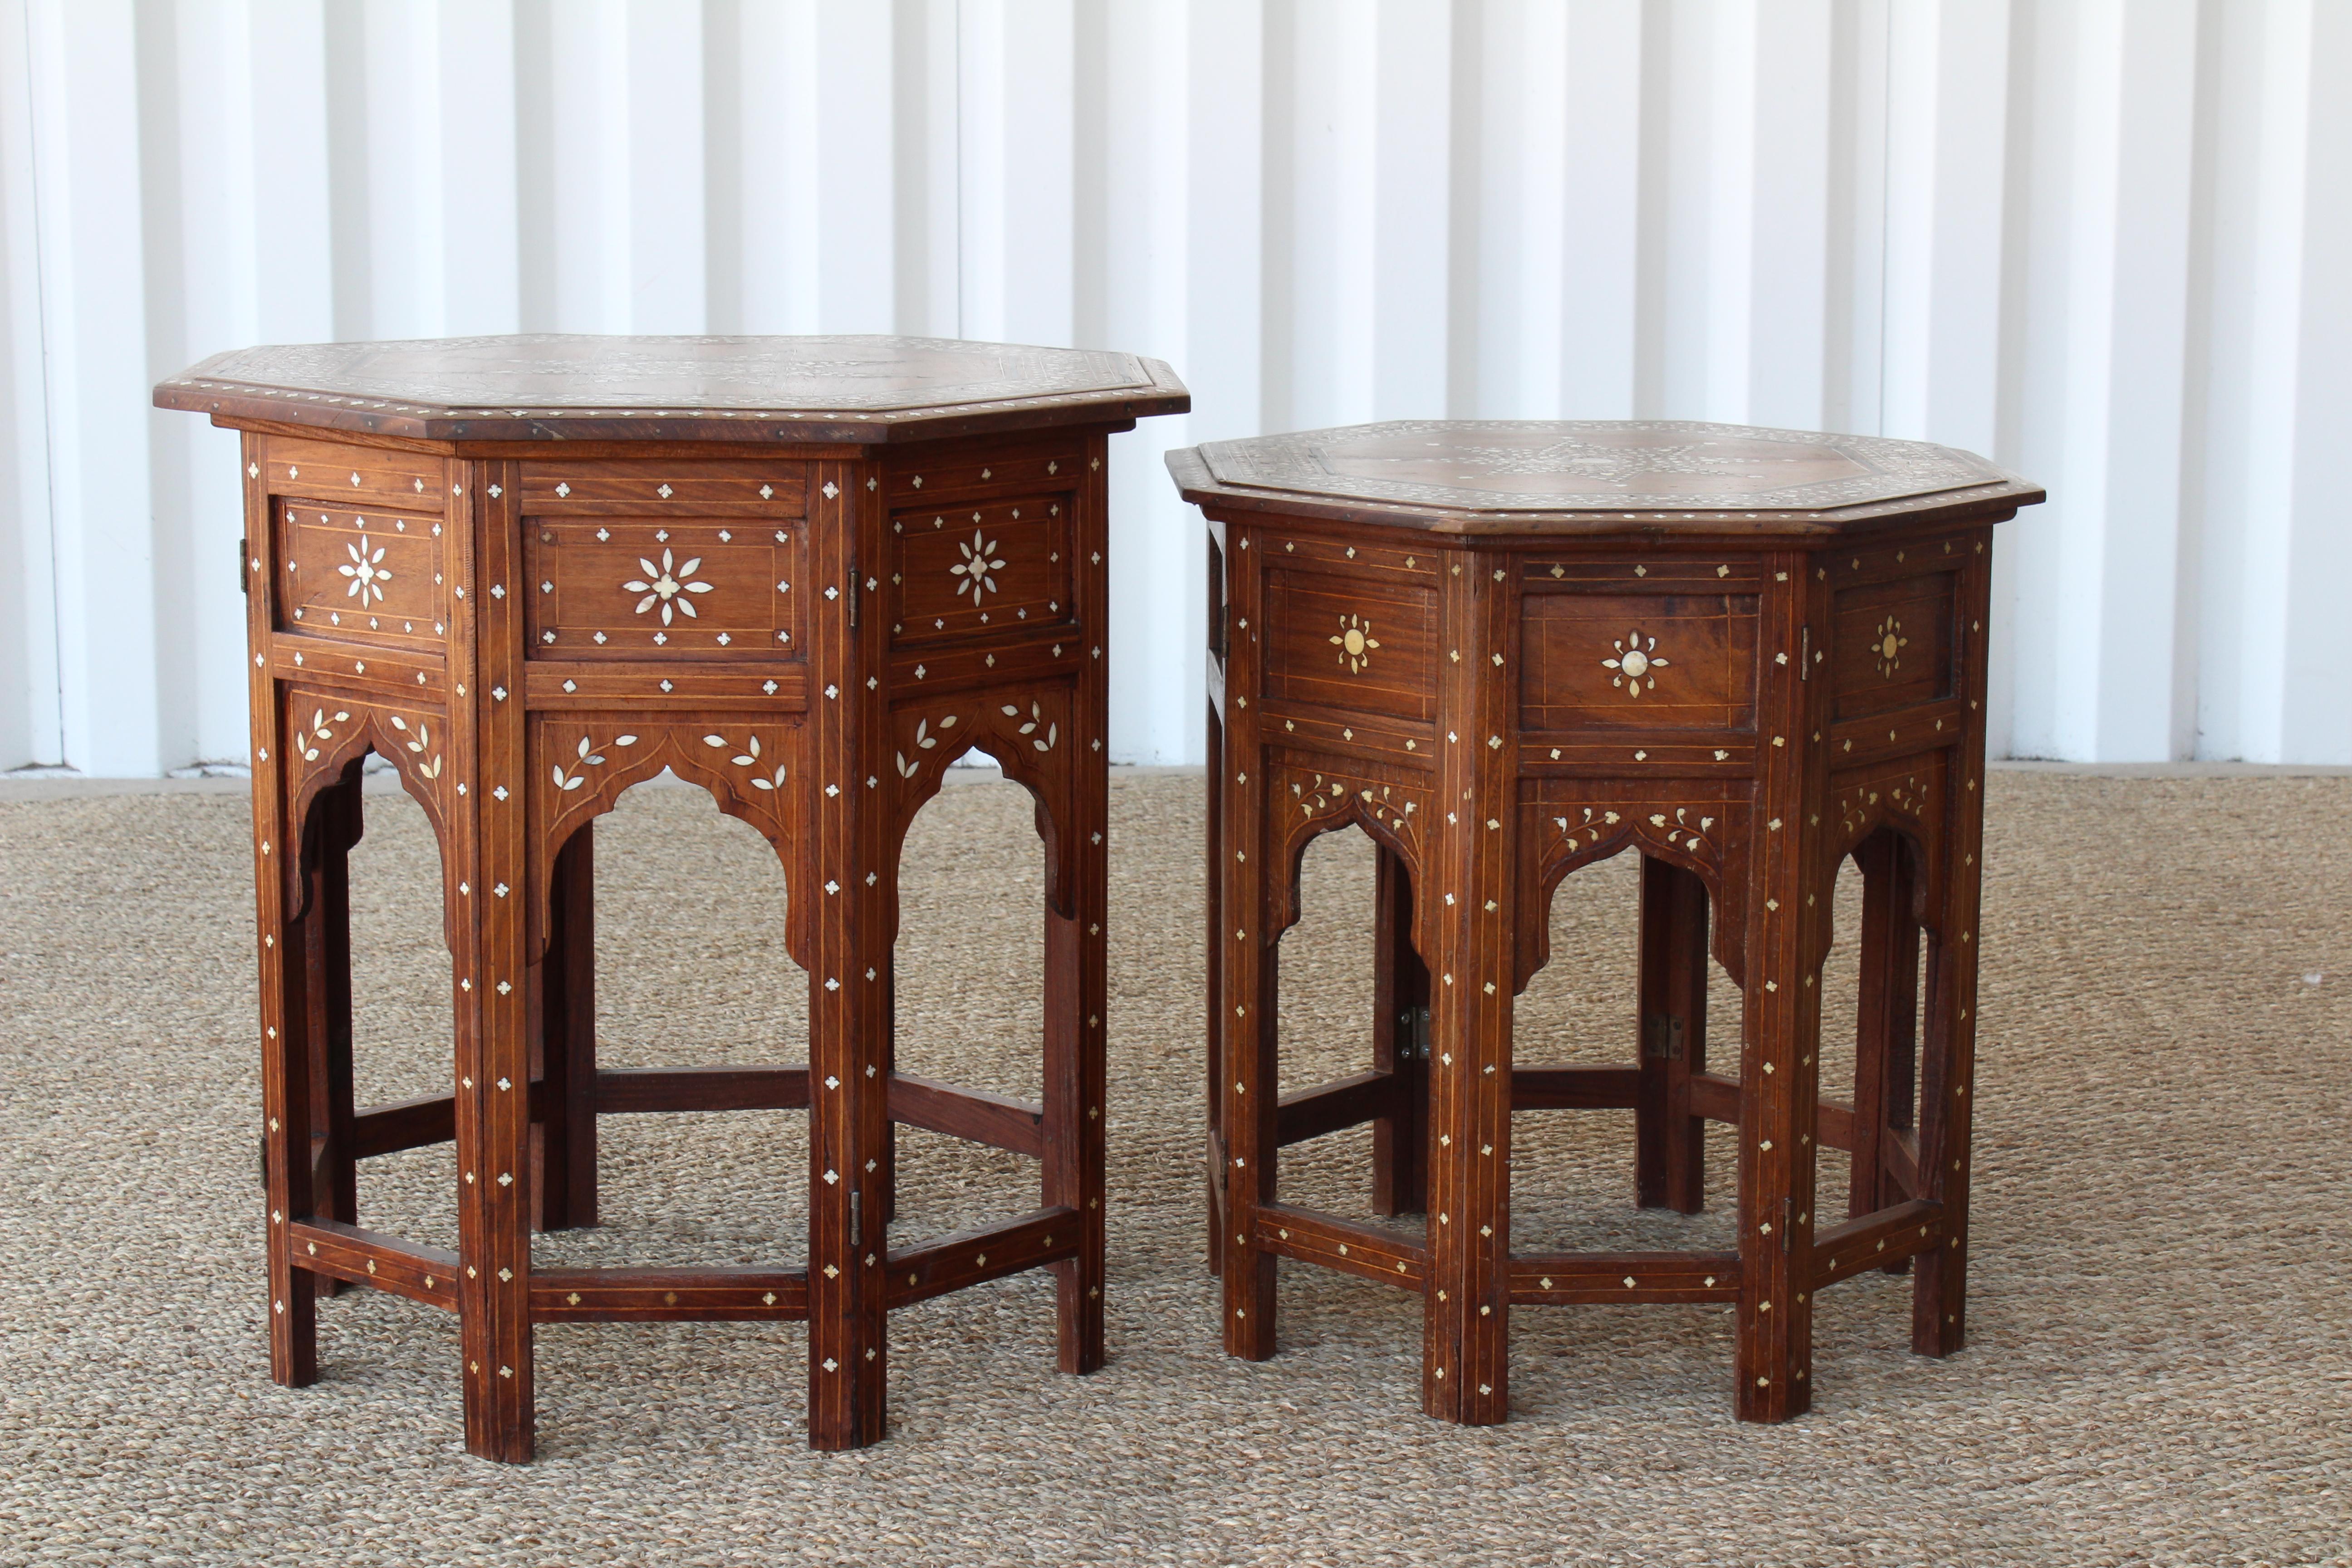 Pair of Syrian inlaid side tables, 1950s. Good condition with some age appropriate wear. Walnut wood has been refinished. Large table is 20 inches high and has a diameter of 21 inches. The smaller table is 18 inches high and has a diameter of 18.5